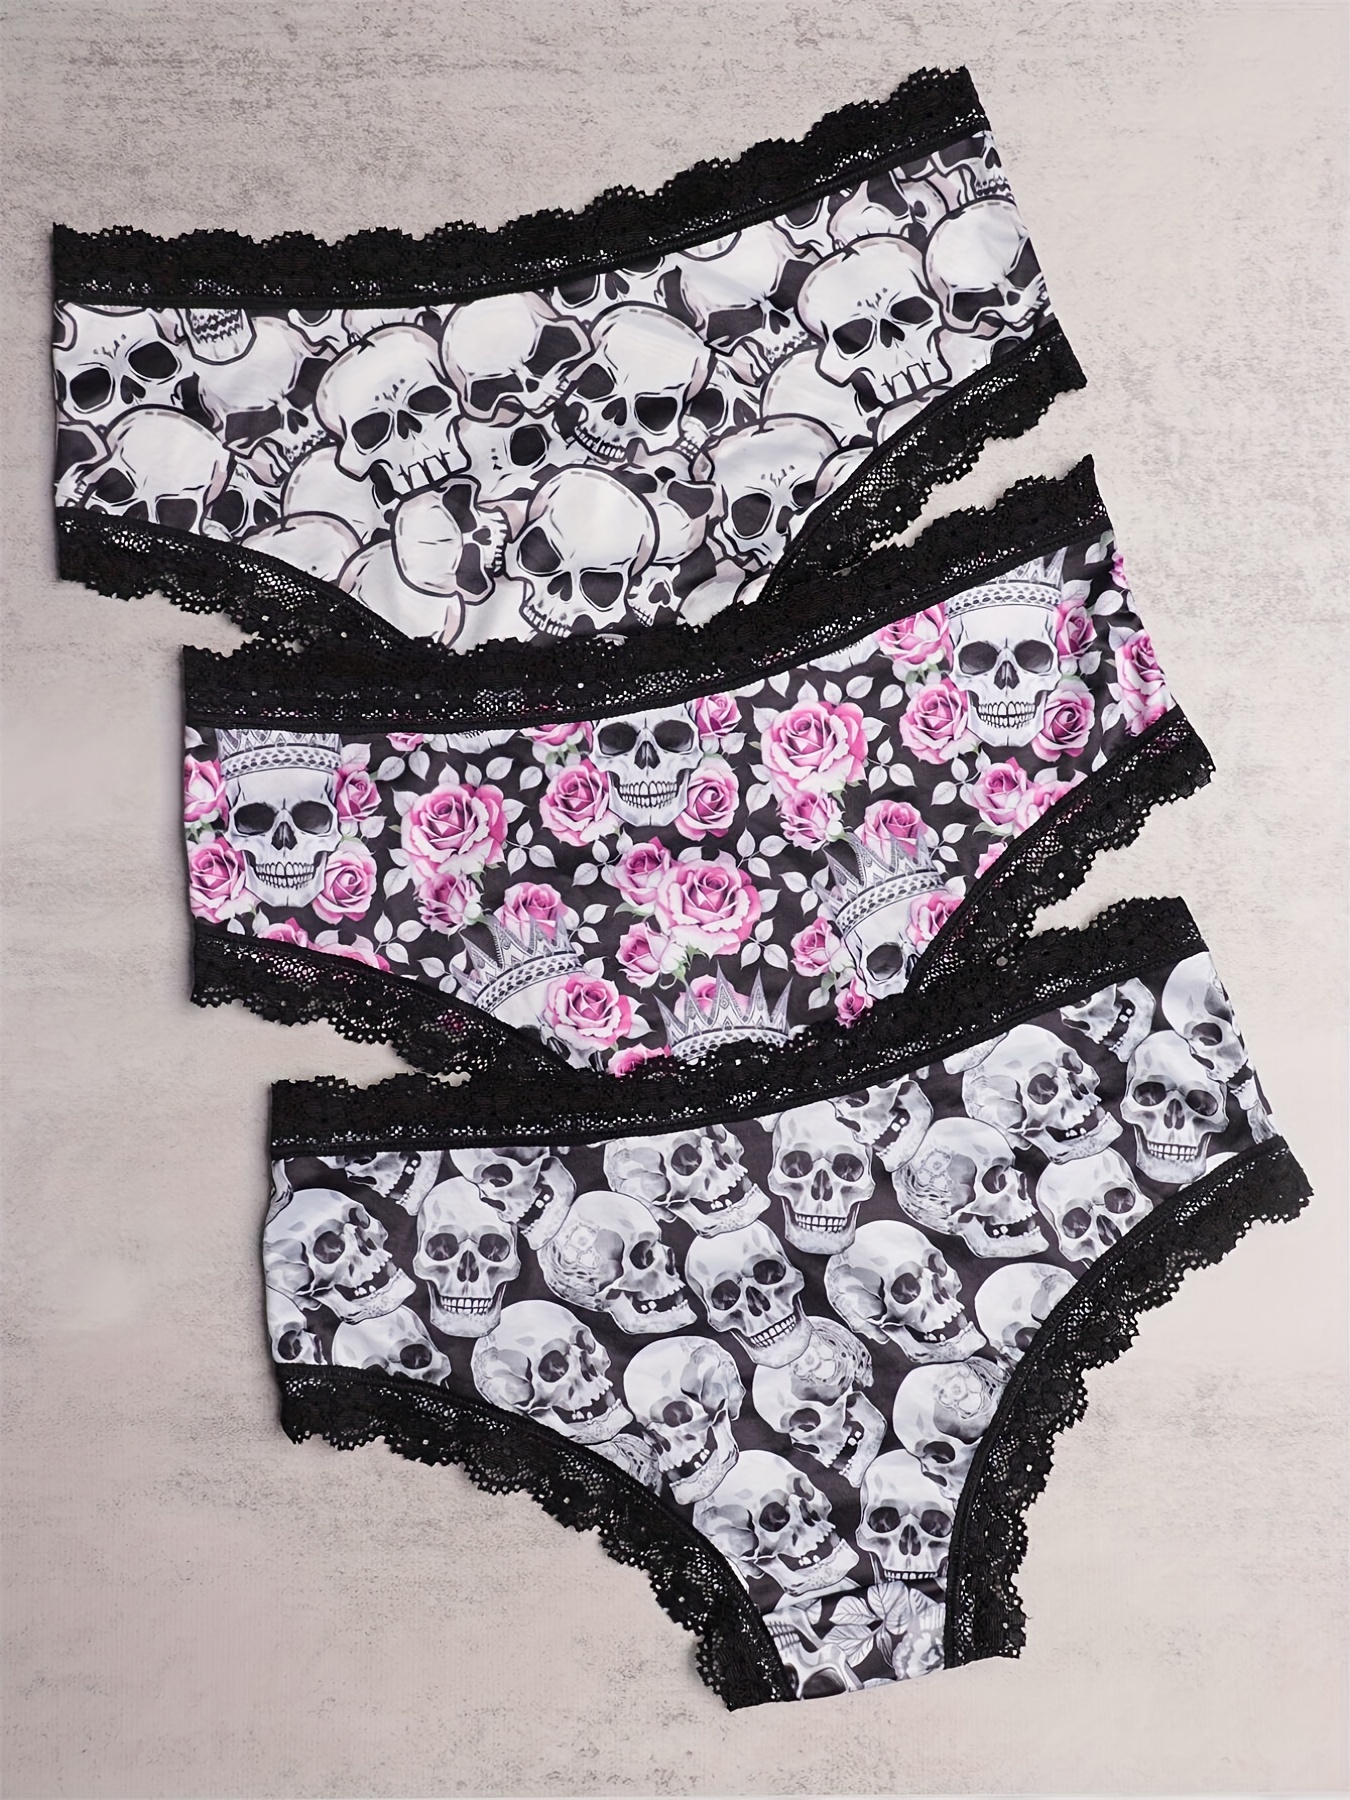 Skull and Crossbones Embroidered Pants in Sheer Black. Unusual Lace Lingerie  , Alternative Clothing, Pirate Underwear -  Canada